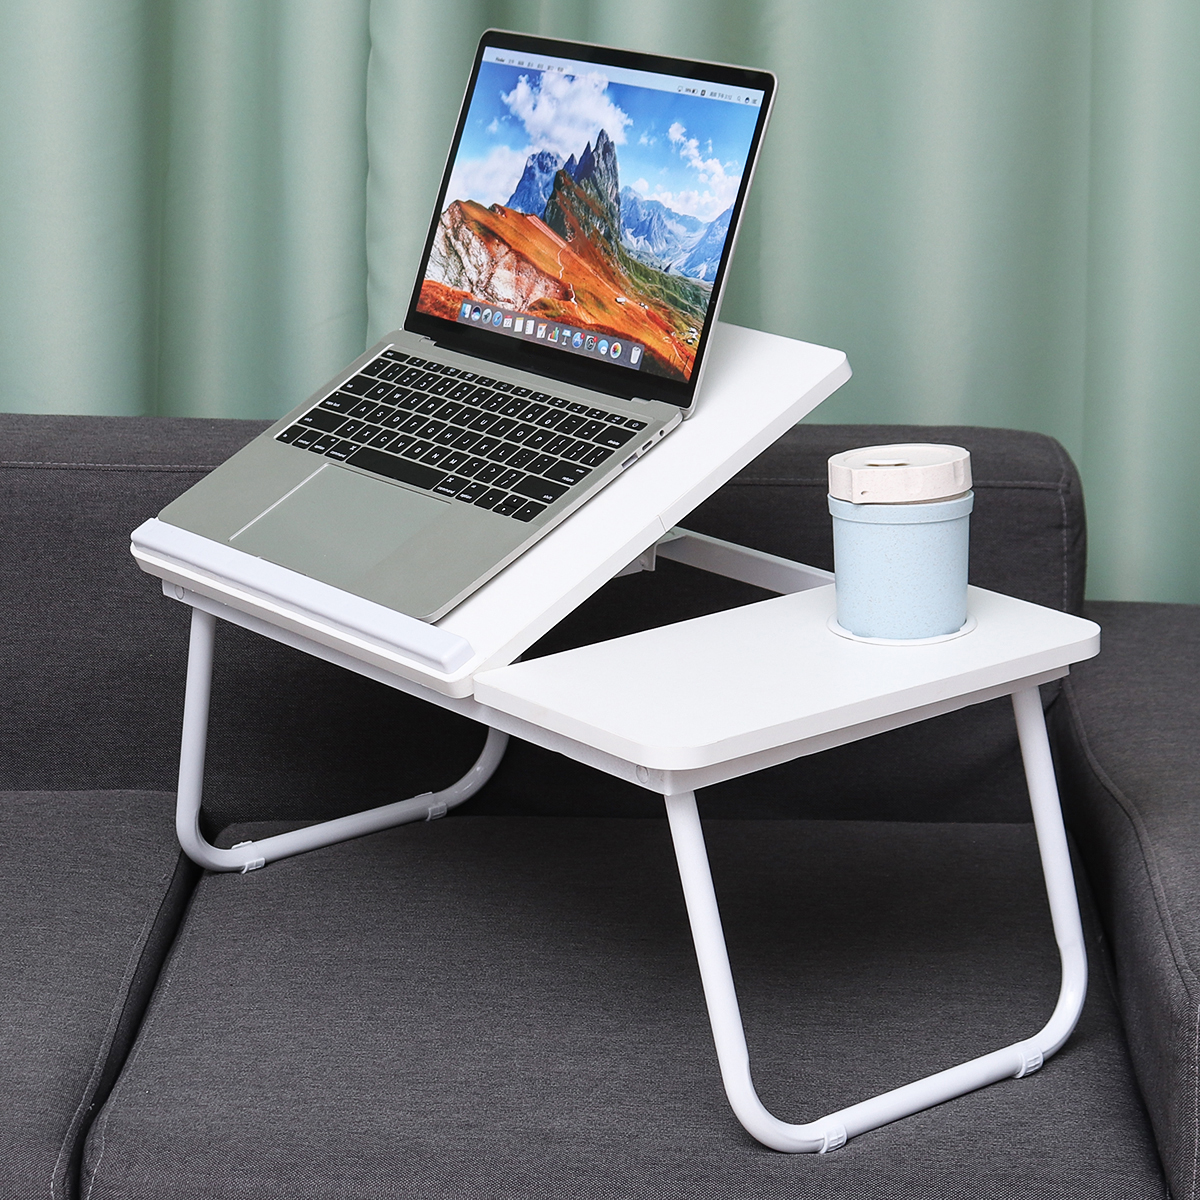 Liftable-Folding-Computer-Desk-Laptop-Stand-4-Heights-Adjustable-with-Cup-Holder-Lap-Bed-Table-Tray--1783876-9